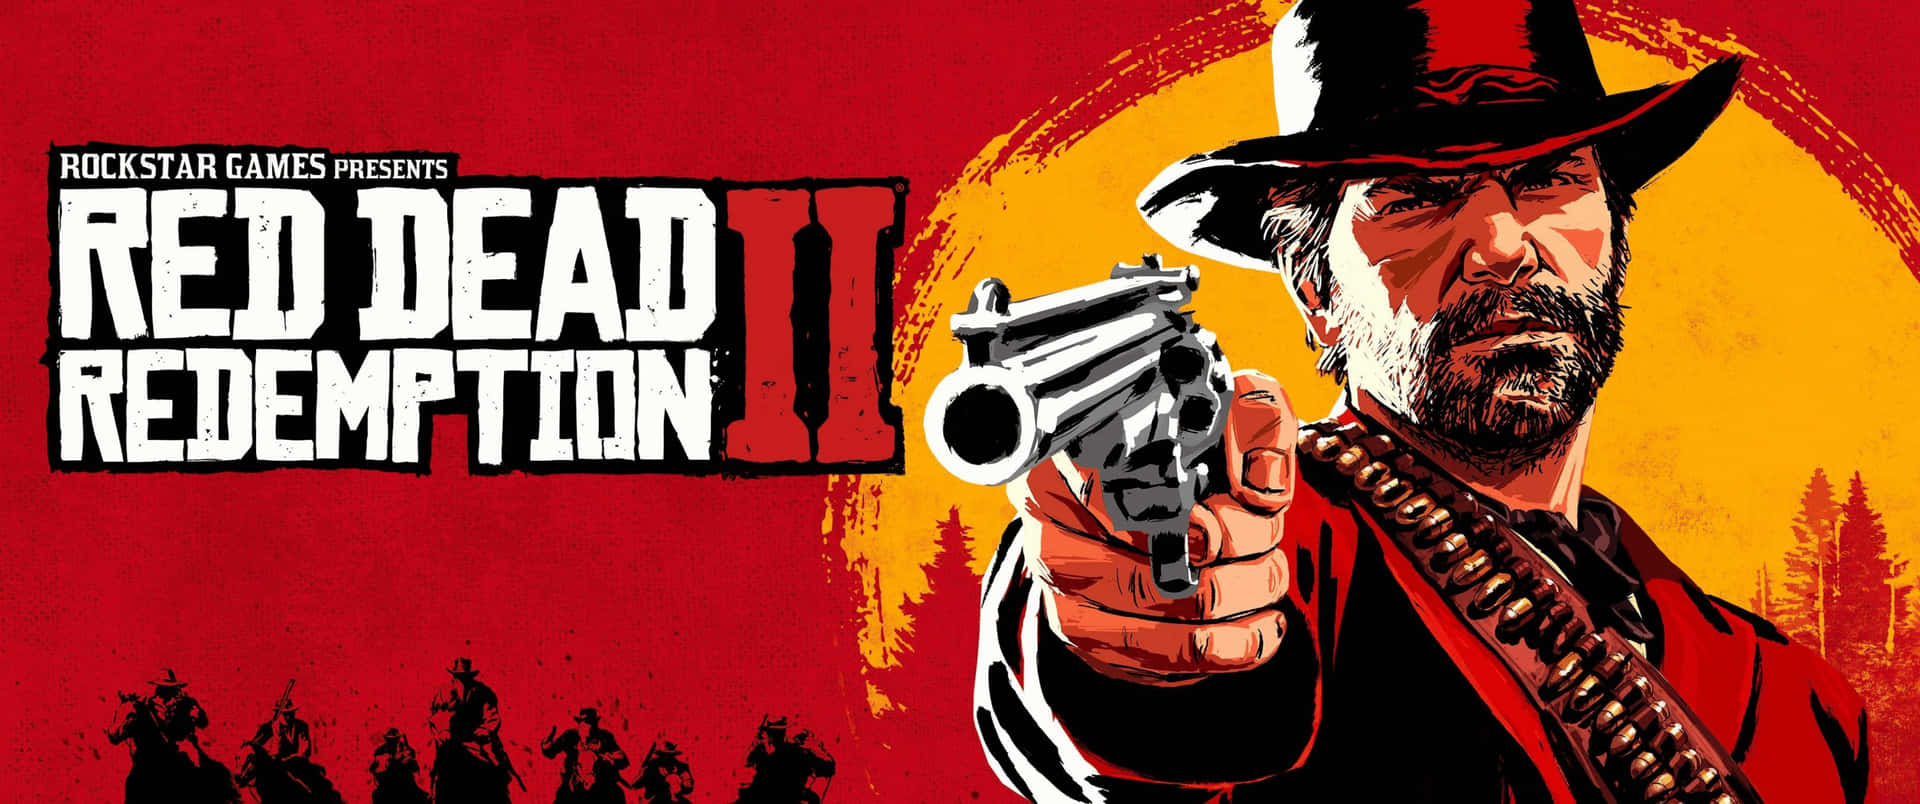 3440x1440p Red Dead Redemption 2 Background Poster Background